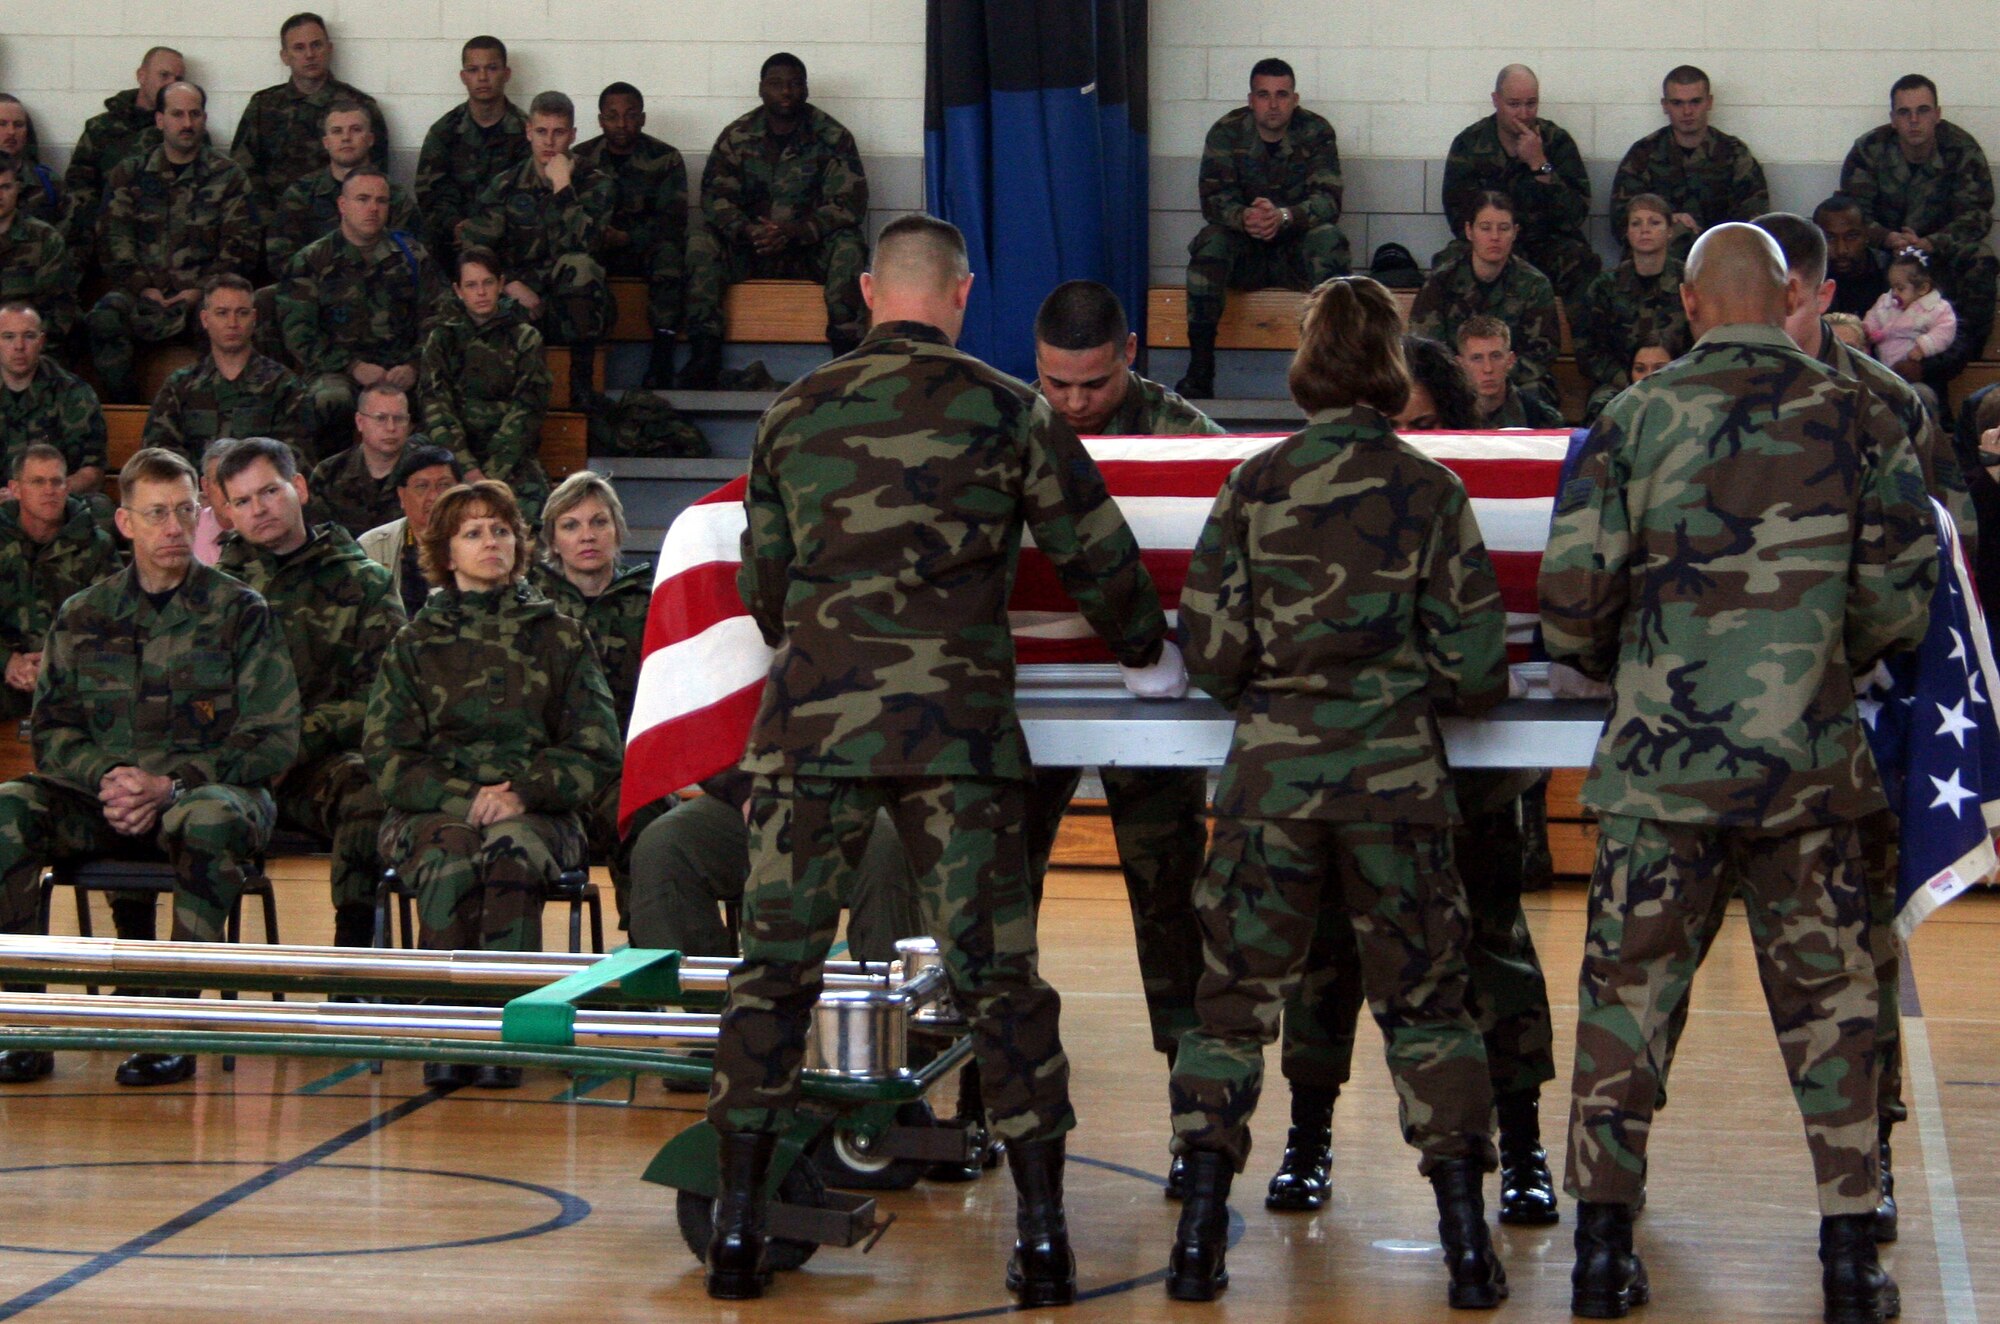 The six-man pallbearer team lowers a casket as Col. Lansen Conley, vice commander 82nd Training Wing, watches during the mock funeral held as part of the U.S. Air Force honor guards instruction team's visit Feb. 5 through Feb. 10. The instruction team was at Sheppard to teach local base honor guards how to perform full military honors. (U.S. Air force photo/Adrian McCandless)